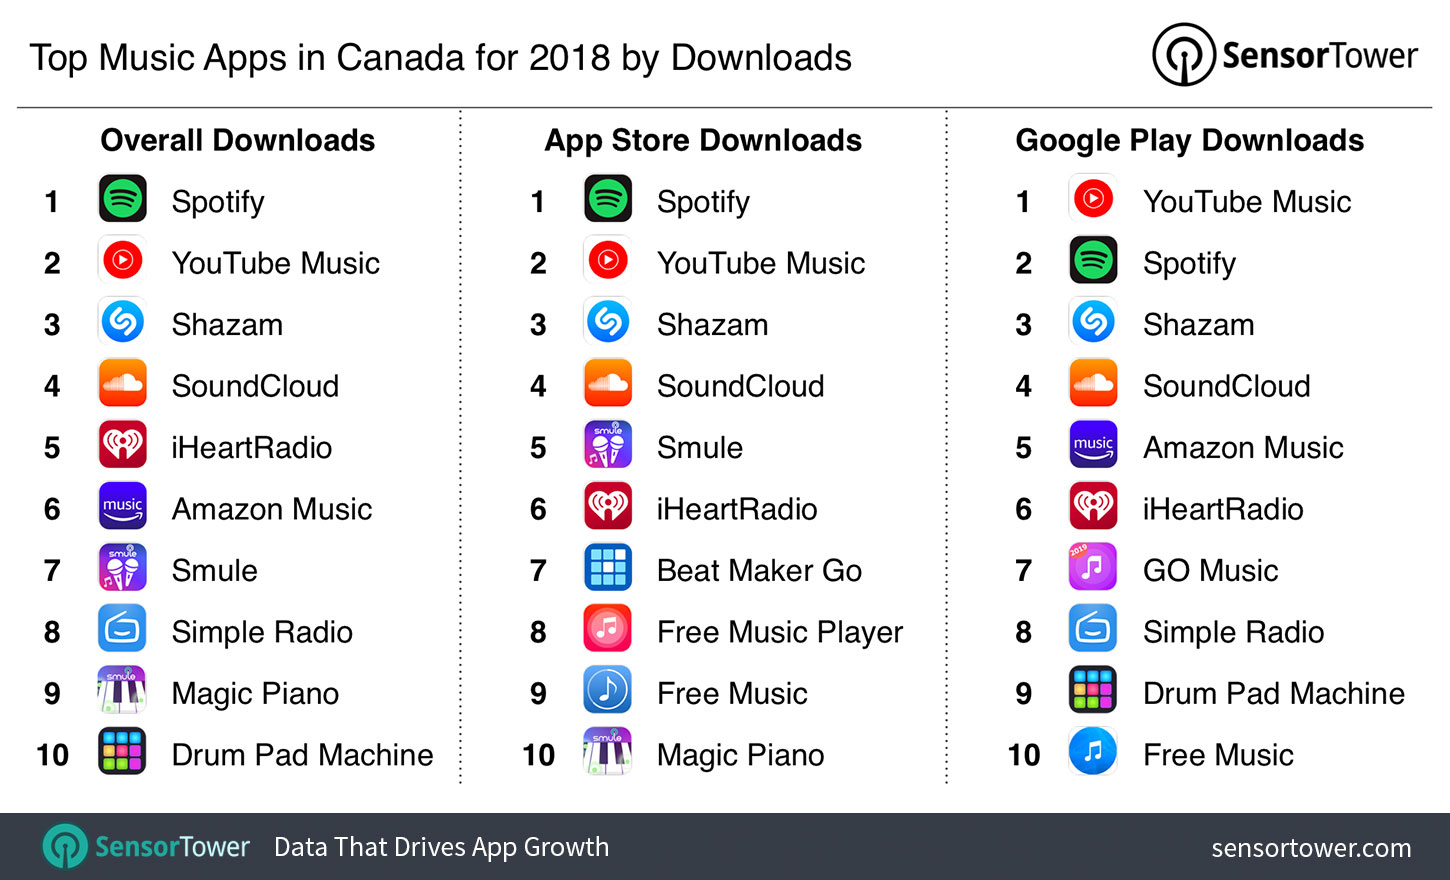 Top Music Apps in Canada for 2018 by Downloads